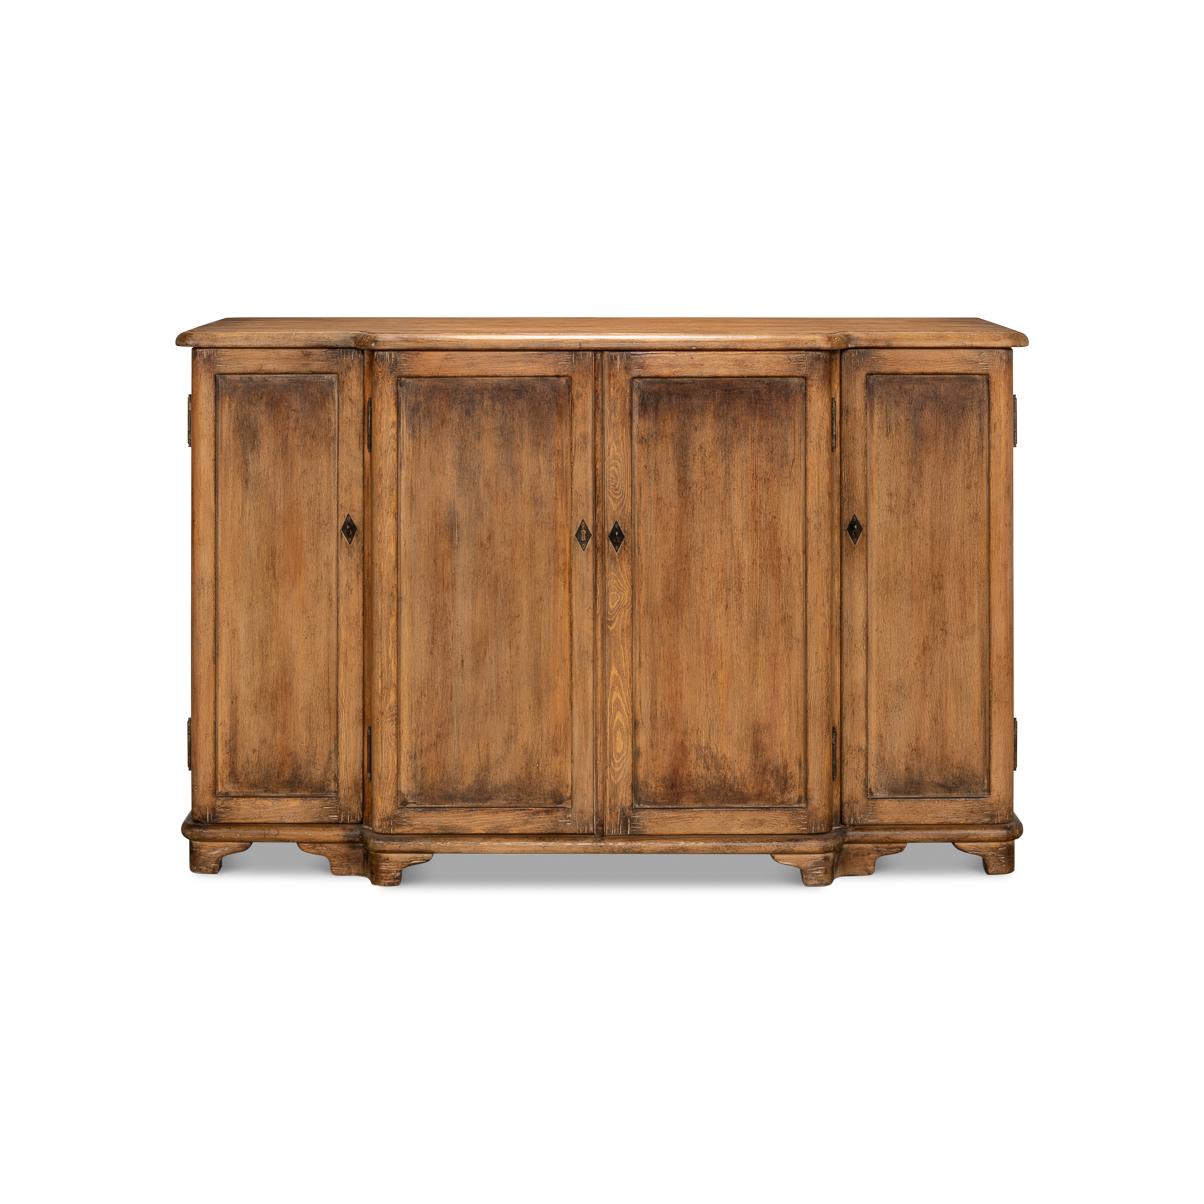 A warm brown finish to the pine wood offers a neutral palette that complements various decors.

The classic breakfront design adds subtle interest, with an ogee molded edge top, a four-door compartment that provides practical storage space. Ideal